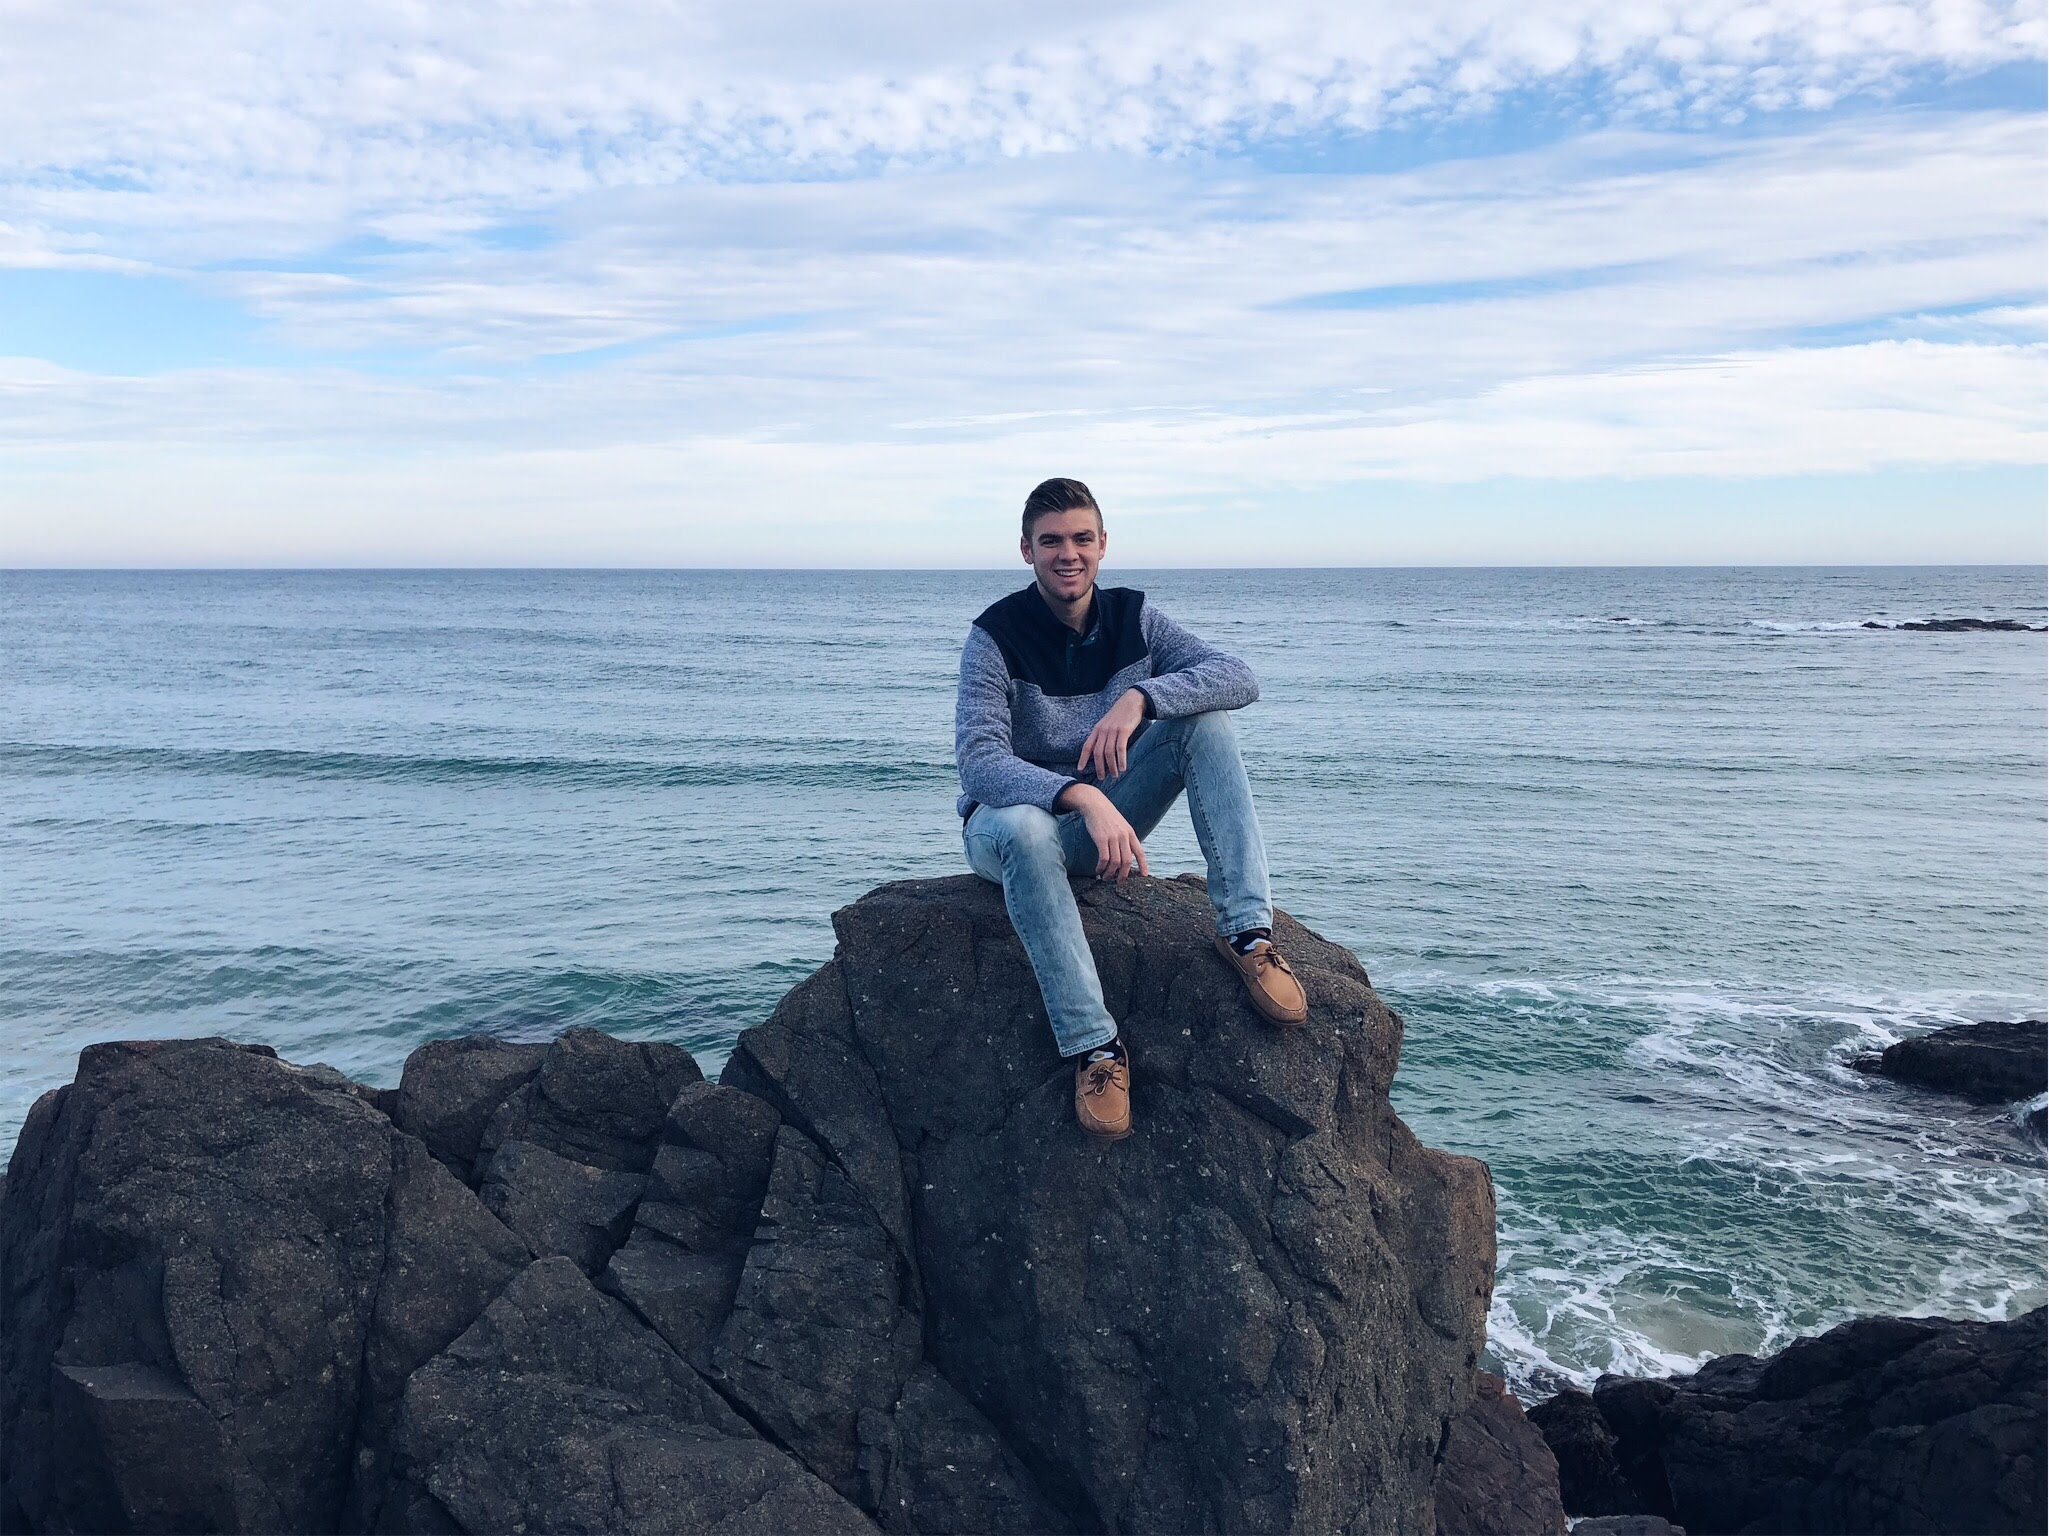 Student sitting rocks on the beach. Follow this Summer 2018’s Office of Study Abroad & International Experiences Global Correspondent, Michael Gergely, on his studies in Marburg, Germany! Michael is a UMass Lowell Ecnomics major studying this summer on a UMass Exchange: Marburg, Germany - Hessen ISU Philipps-Universität Marburg